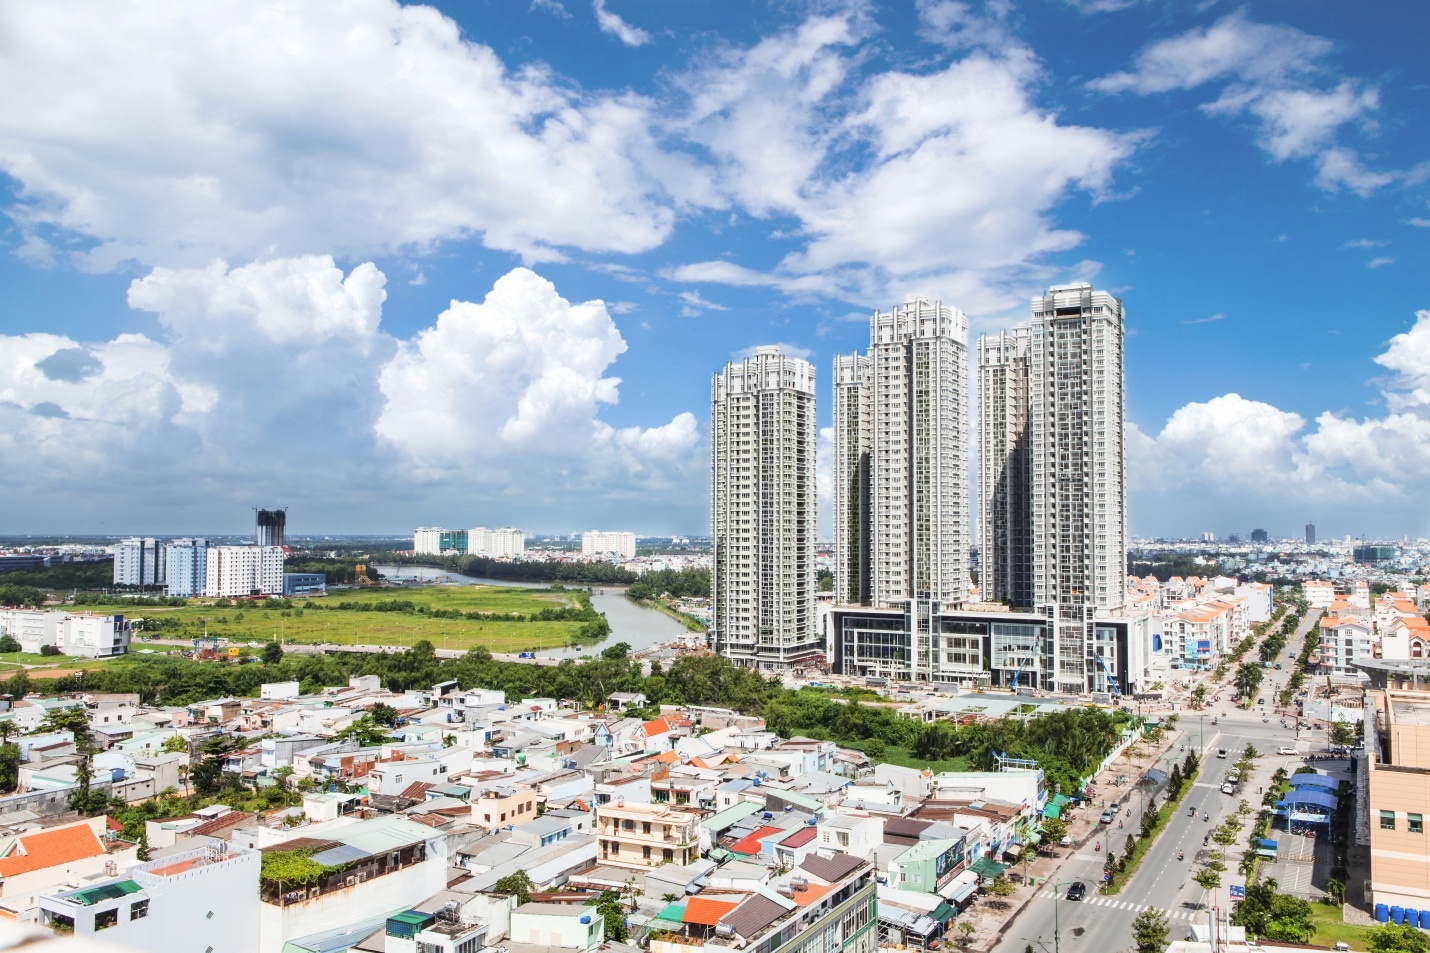 New residential developments in the city can sell up to 30 per cent to foreigners.